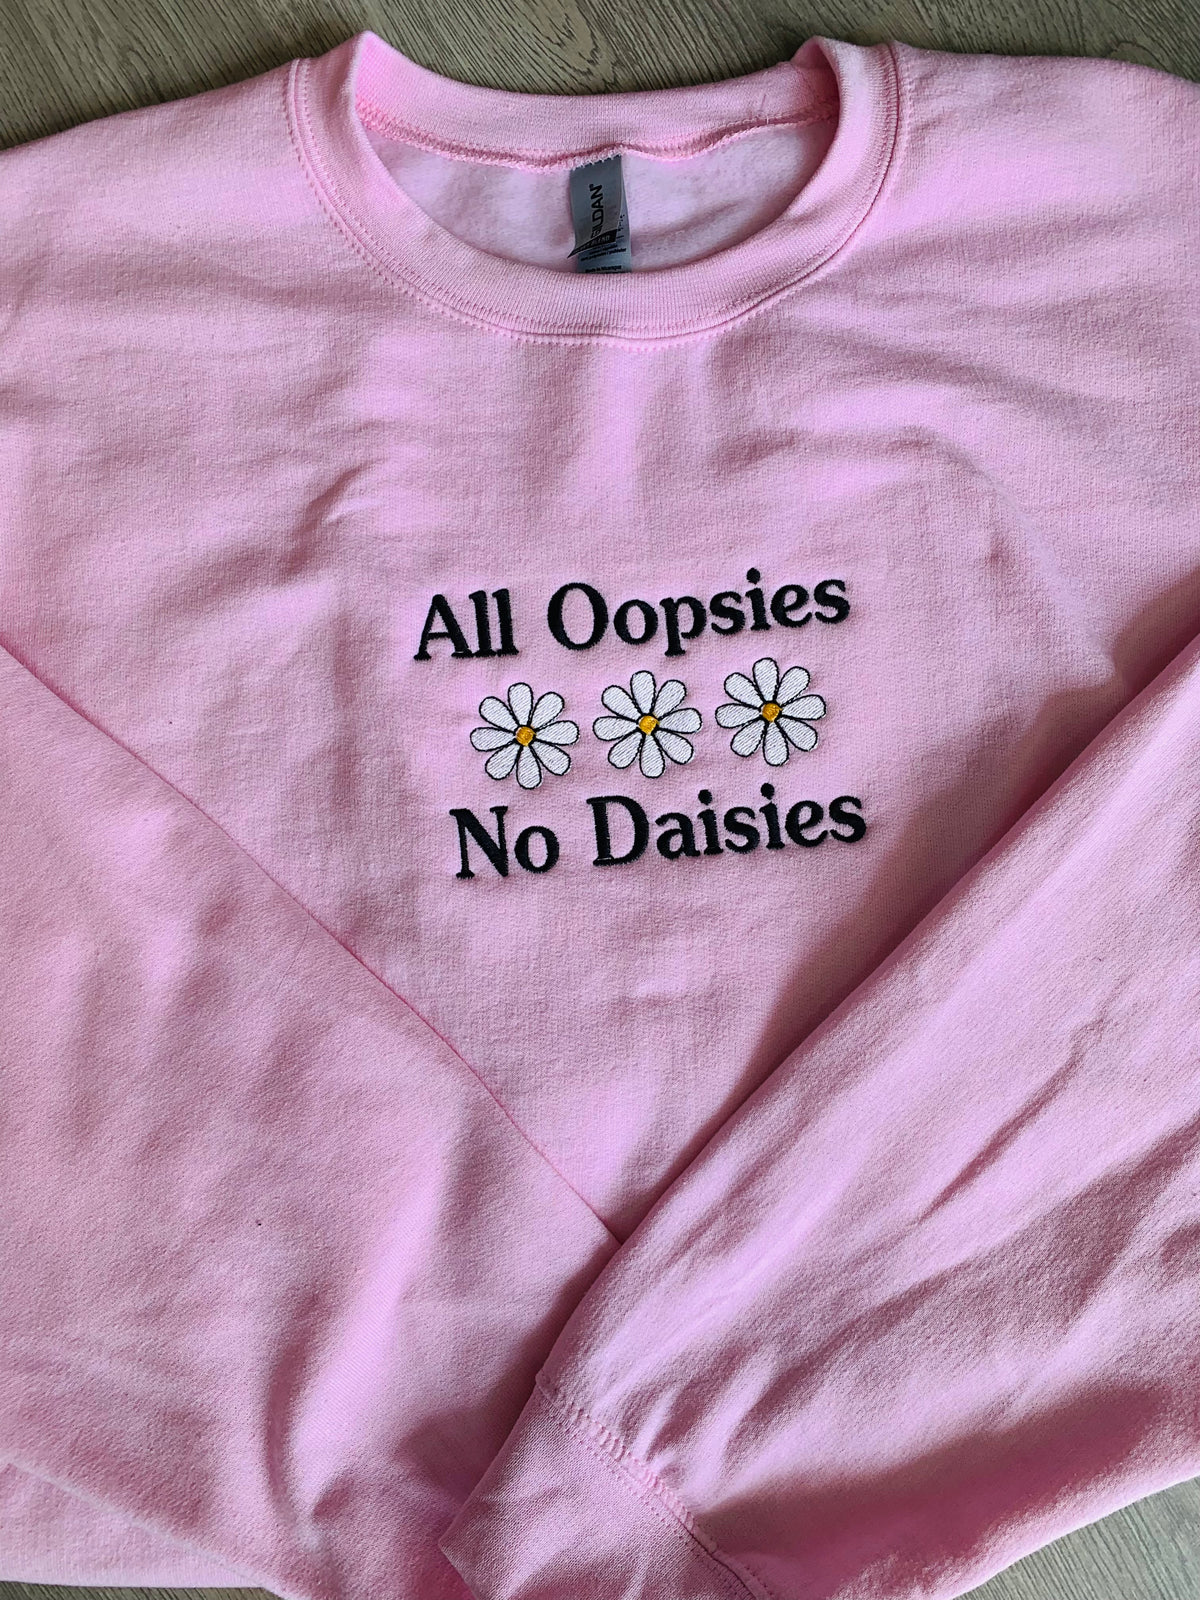 All Oopsies No Daisies Embroidered Sweatshirt-Sweatshirt-Peachy Keen Boutique-Peachy Keen Boutique, Women's Fashion Boutique, Located in Cape Girardeau and Dexter, MO